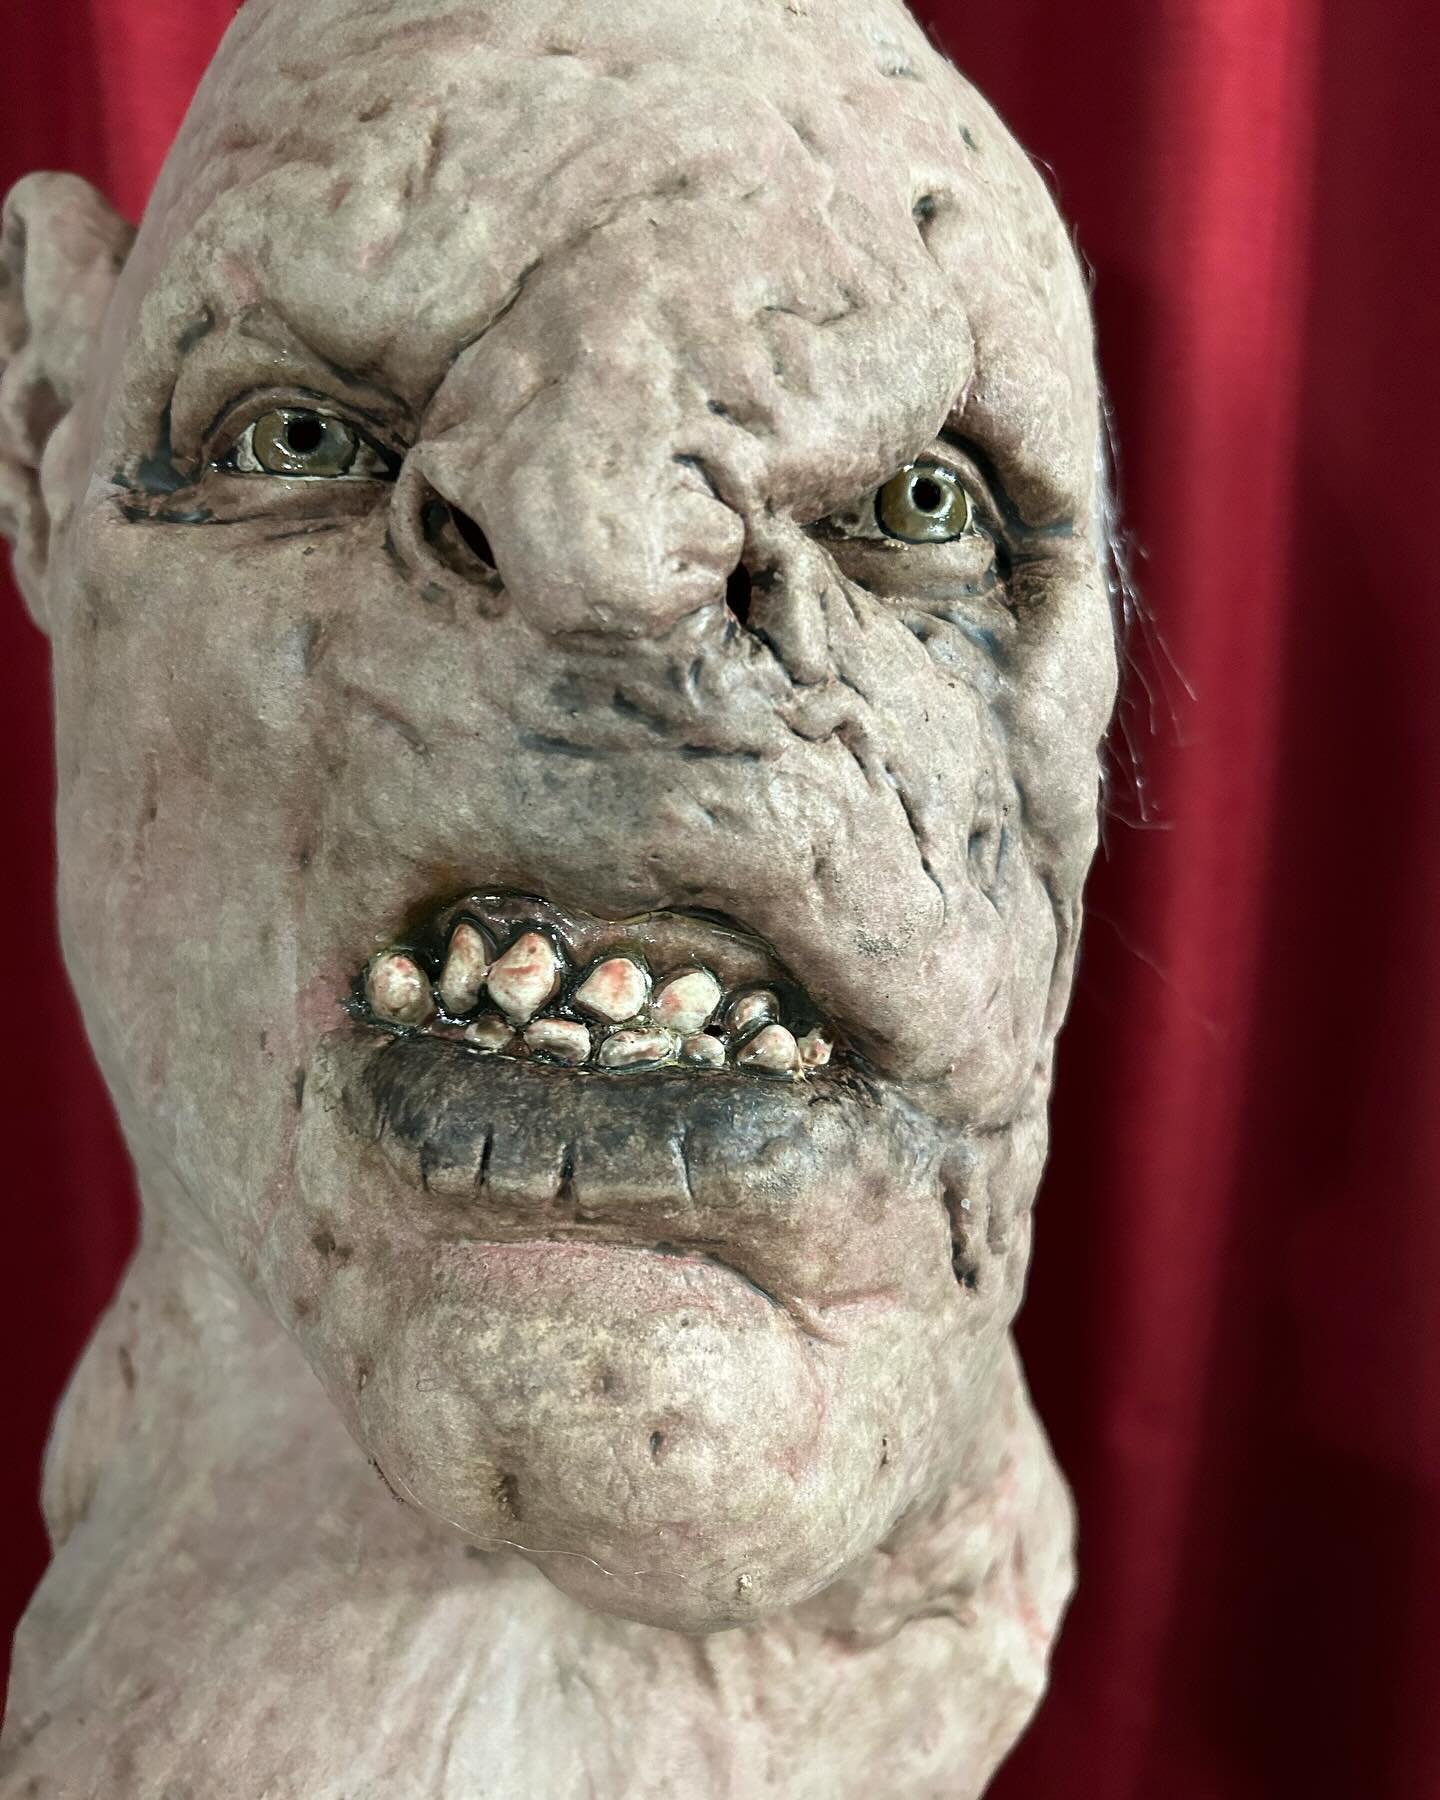 Amazing new mask just arrived. The new @lordoftherings Gothmog mask will be listing soon at Lordgrimley.com 

#halloween365 #halloween #horror #cosplay #trickortreat #halloweenmask #mask
#lordgrimleysmanor #lordgrimley.com 
#haunter #halloweendecor #